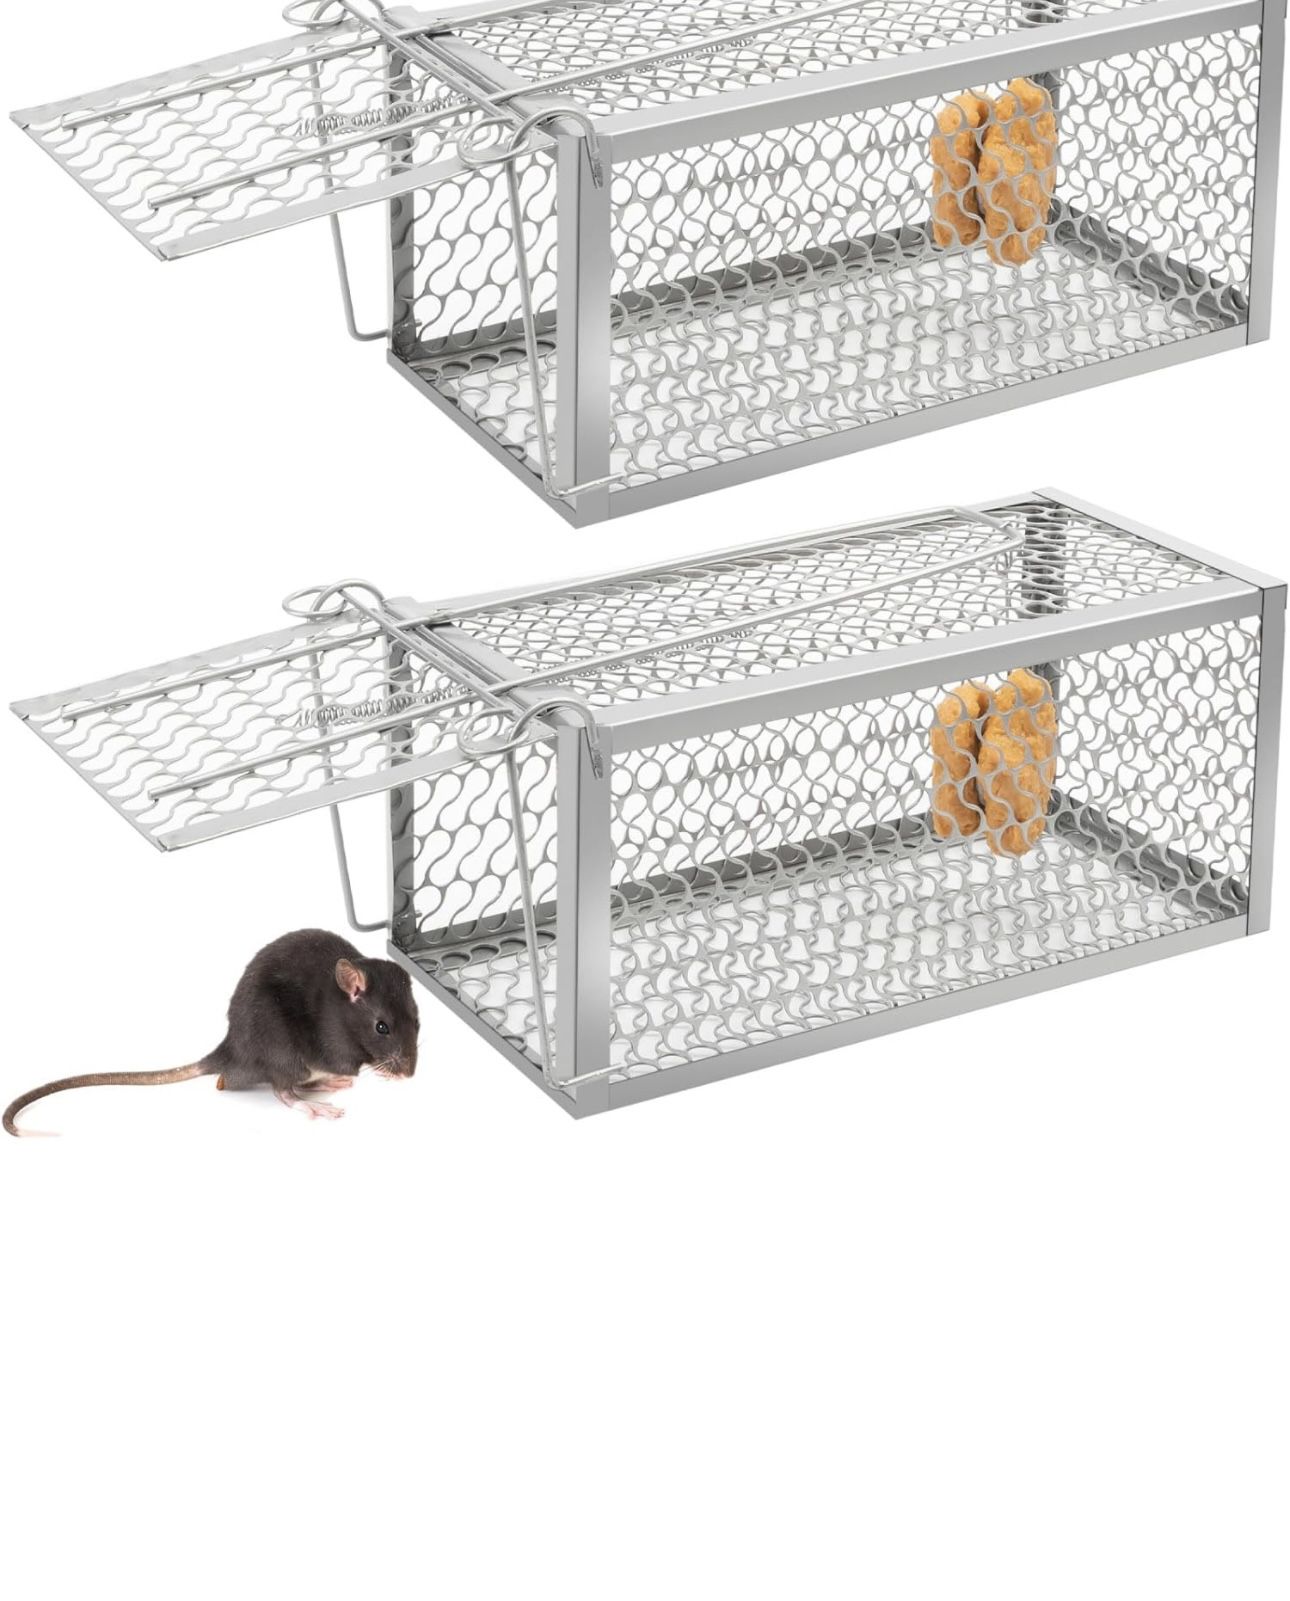 Humane Rat Trap Chipmunk Rodent Trap Mouse Trap Squirrel Trap Small Live Animal Trap Mouse Voles Hamsters Live Cage Rat Mouse Cage Trap for Mice Easy 